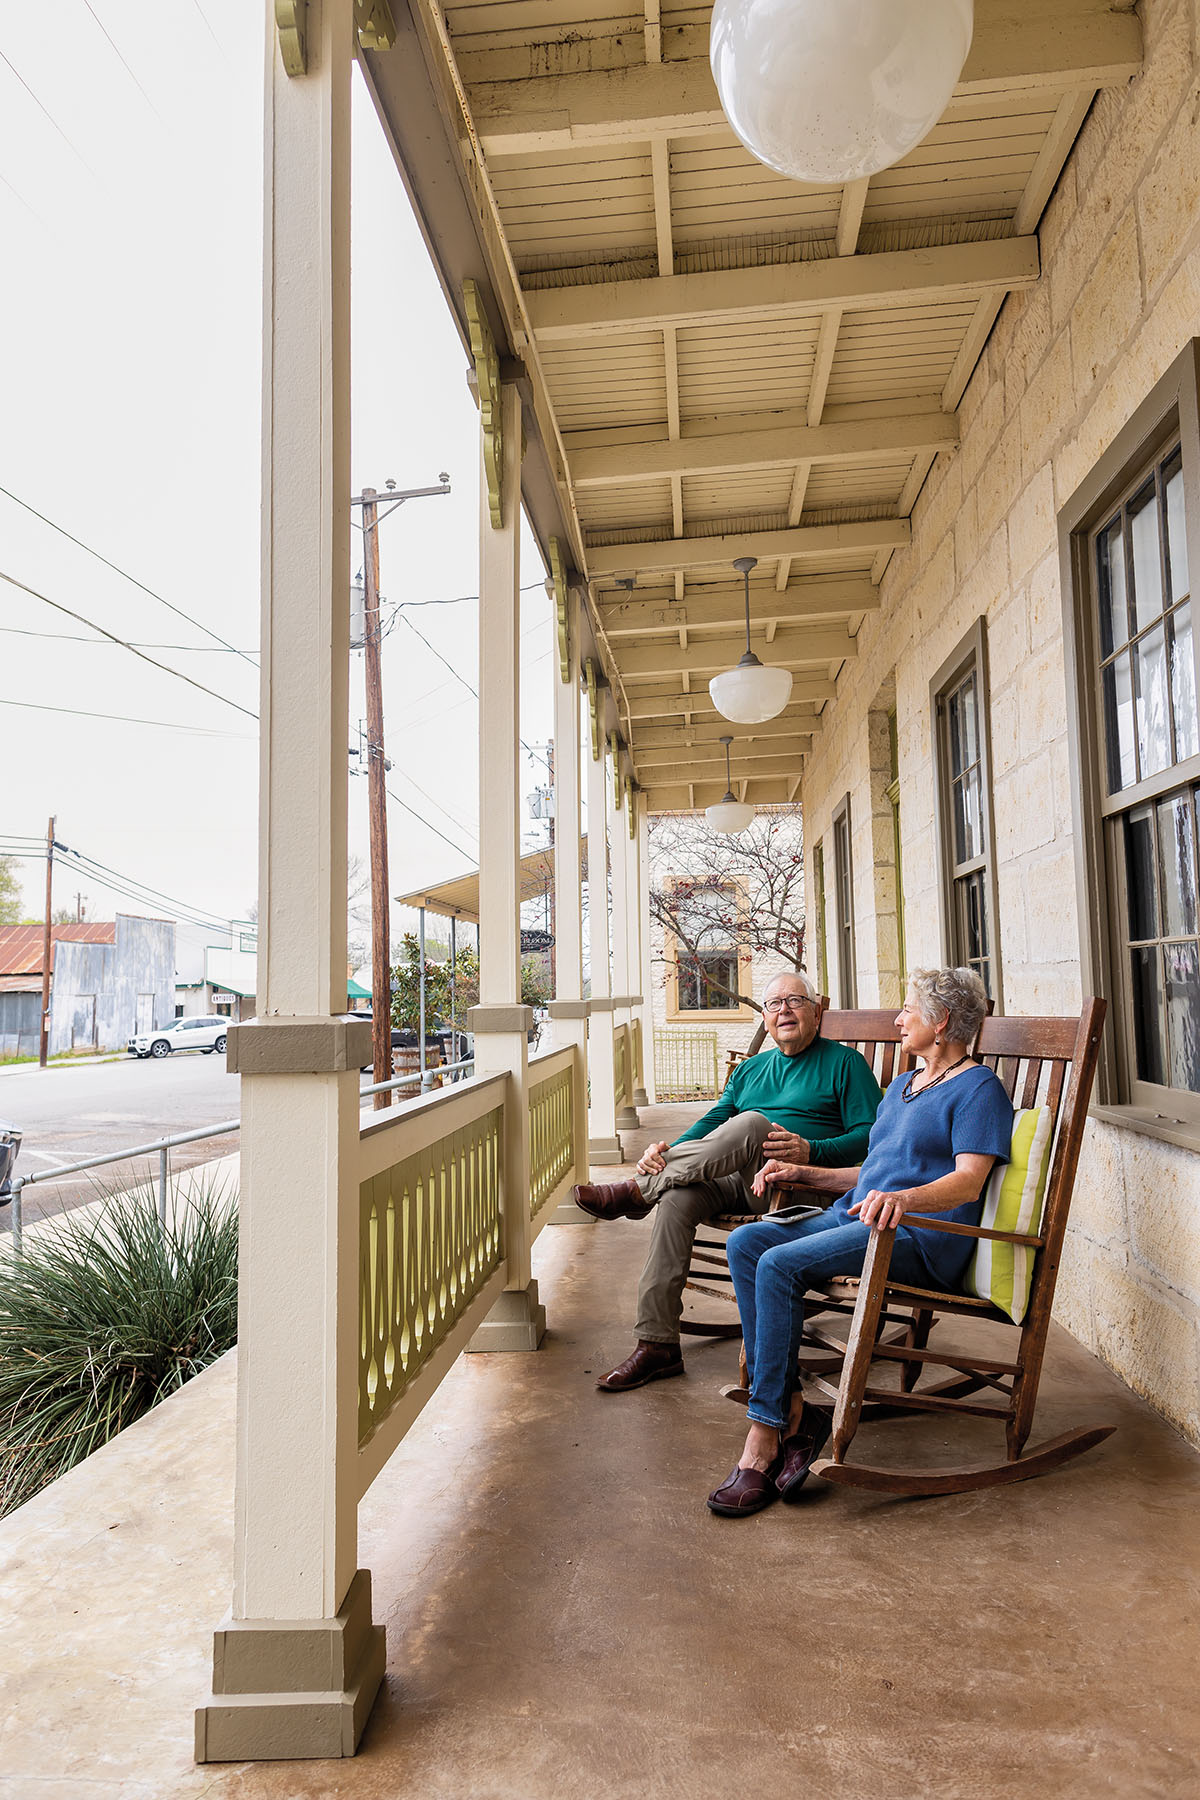 Two people sit in rocking chairs on a porch in a small town